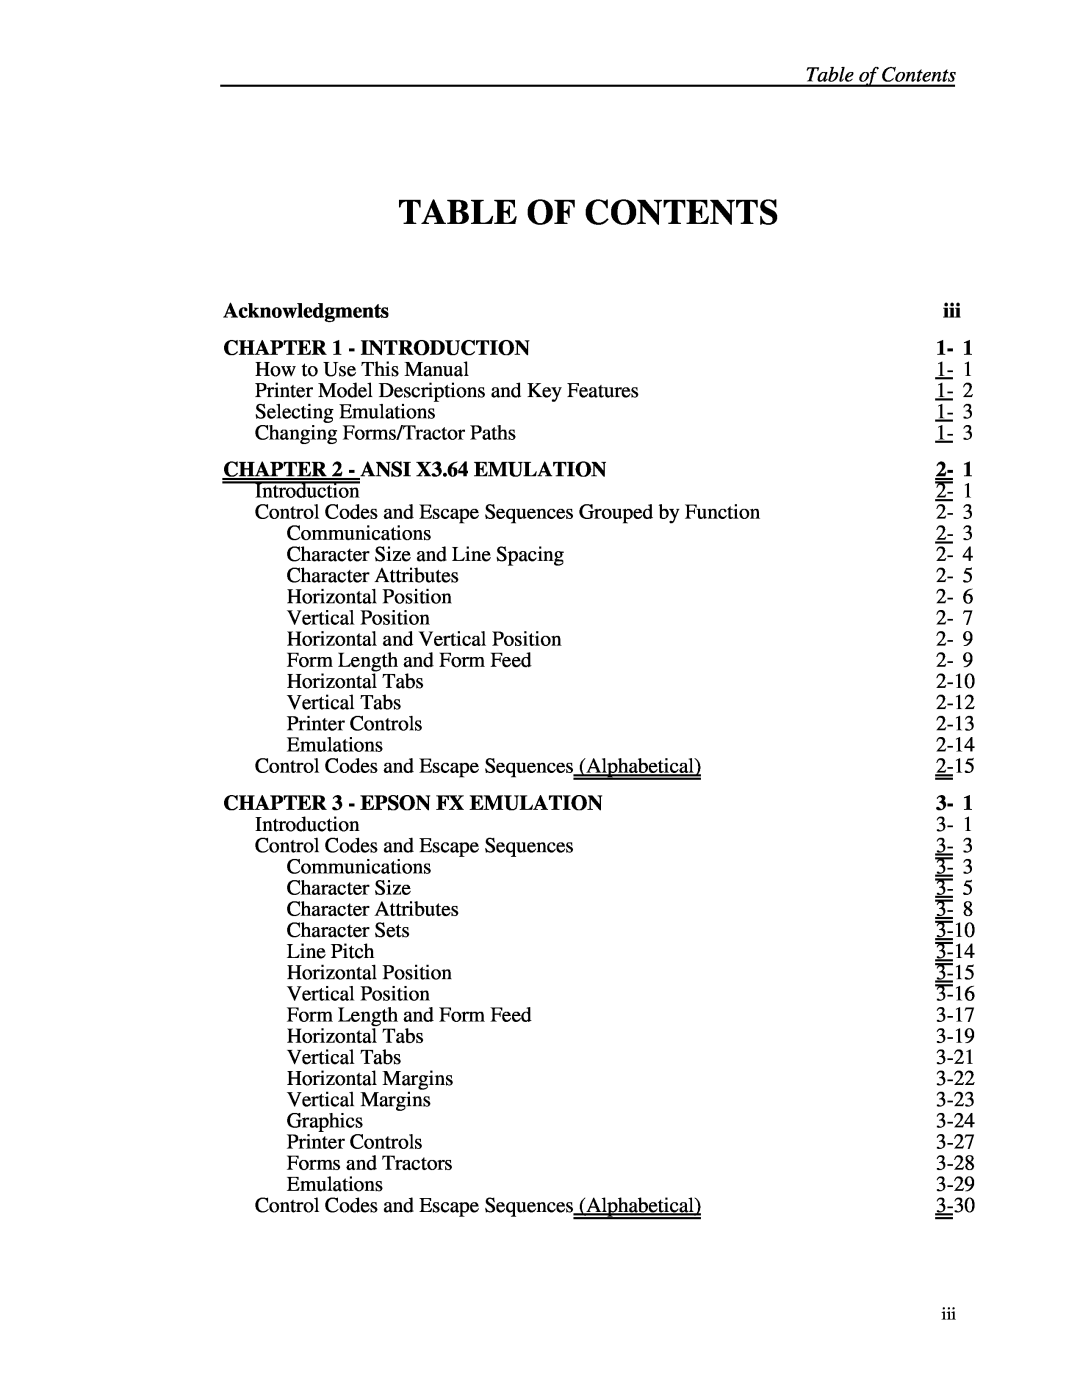 Printek 4500, 4503, 4300 manual Table Of Contents, Acknowledgments, Introduction, ANSI X3.64 EMULATION, Epson Fx Emulation 